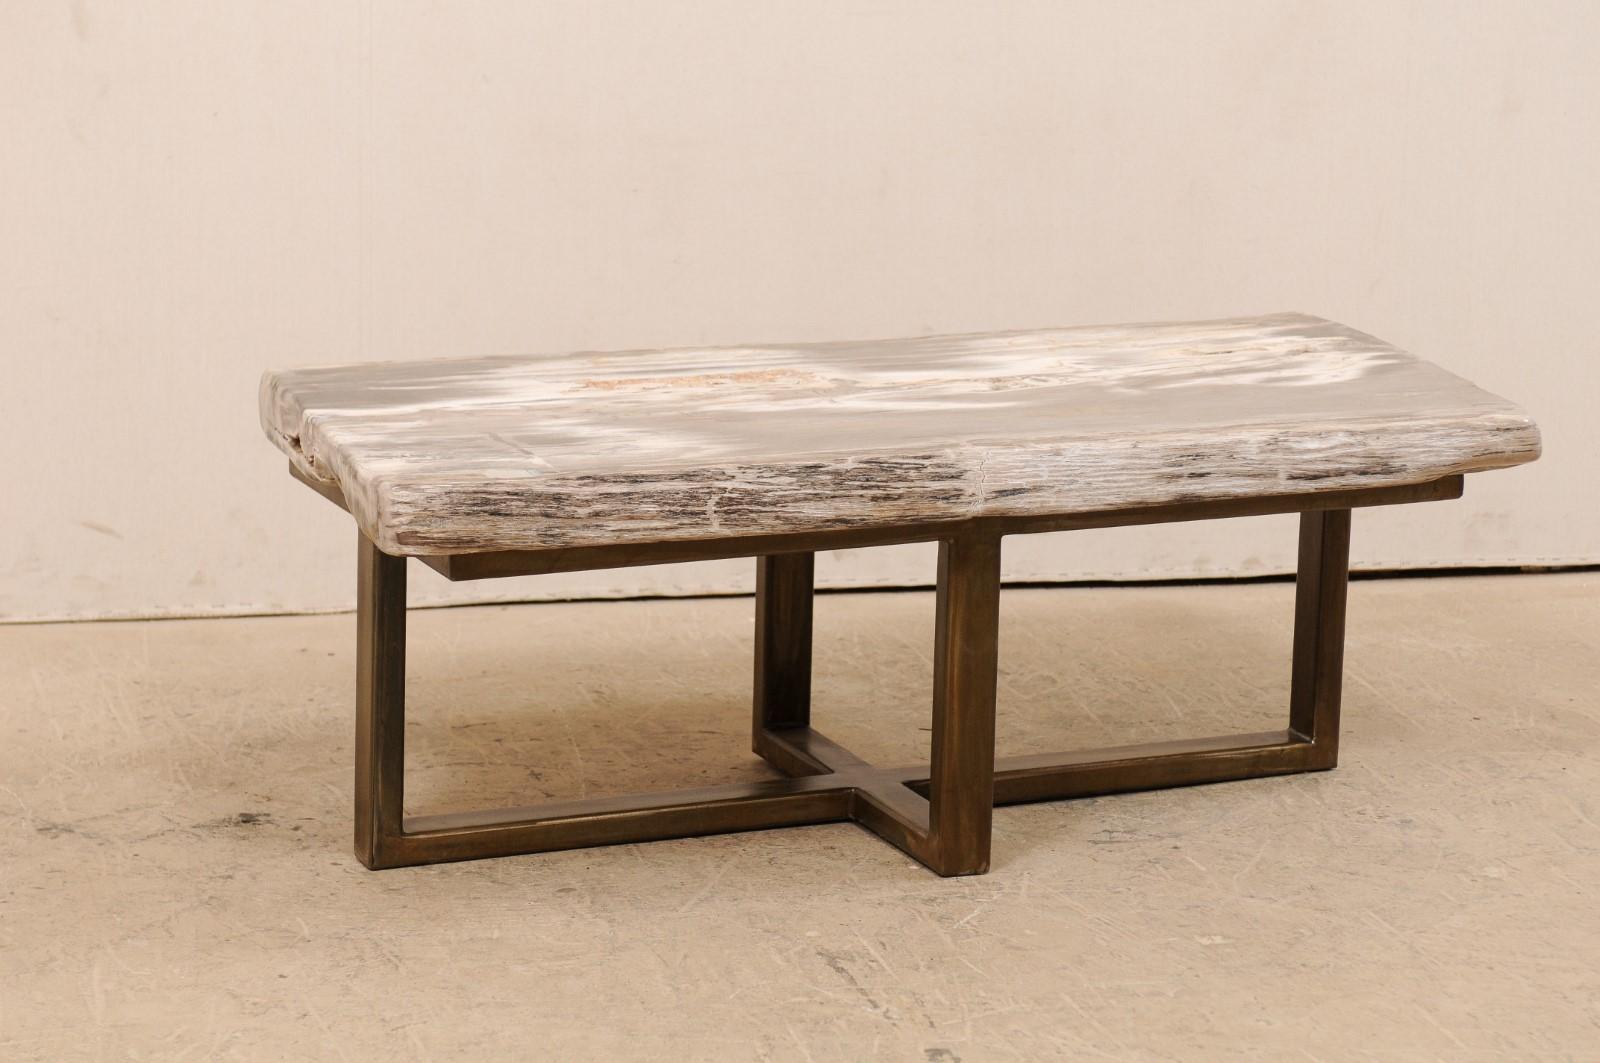 A petrified wood top modernly designed coffee table (or bench). This custom coffee table has been fashioned from a gorgeous single thick slab of smoothly polished petrified wood. This petrified wood top has a soothing grey and white palette and